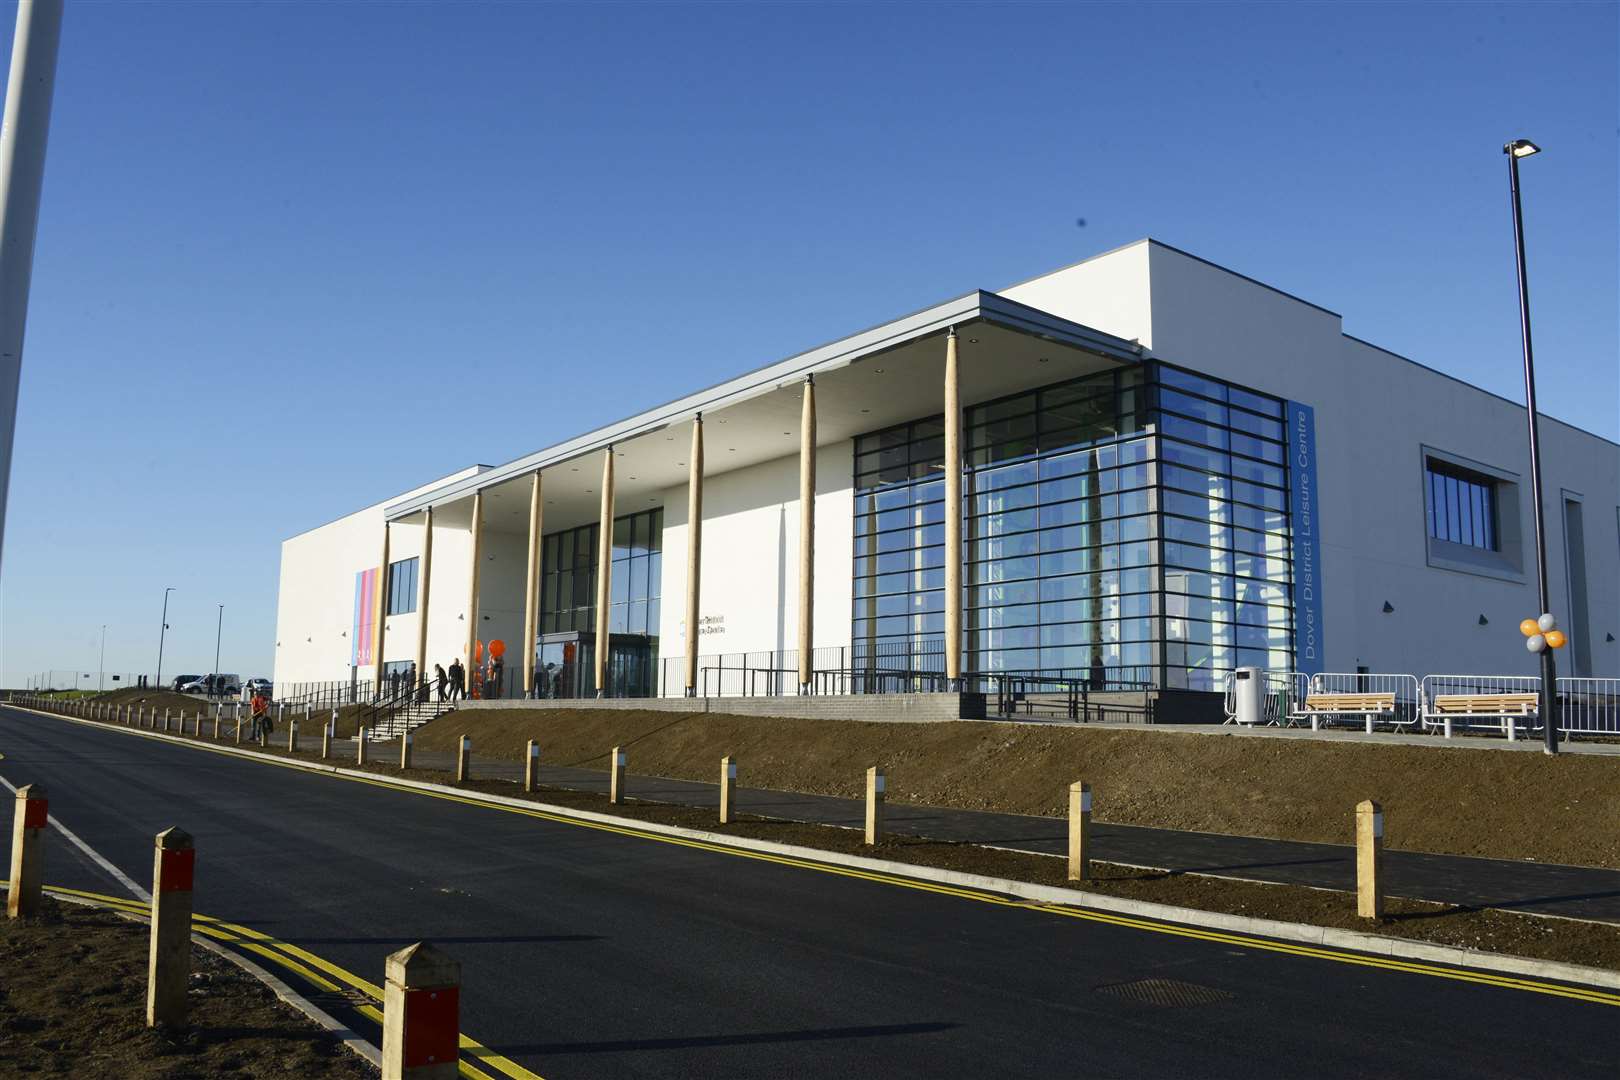 The charity event will be held at the new Dover District Leisure Centre in Whitfield Picture: Paul Amos